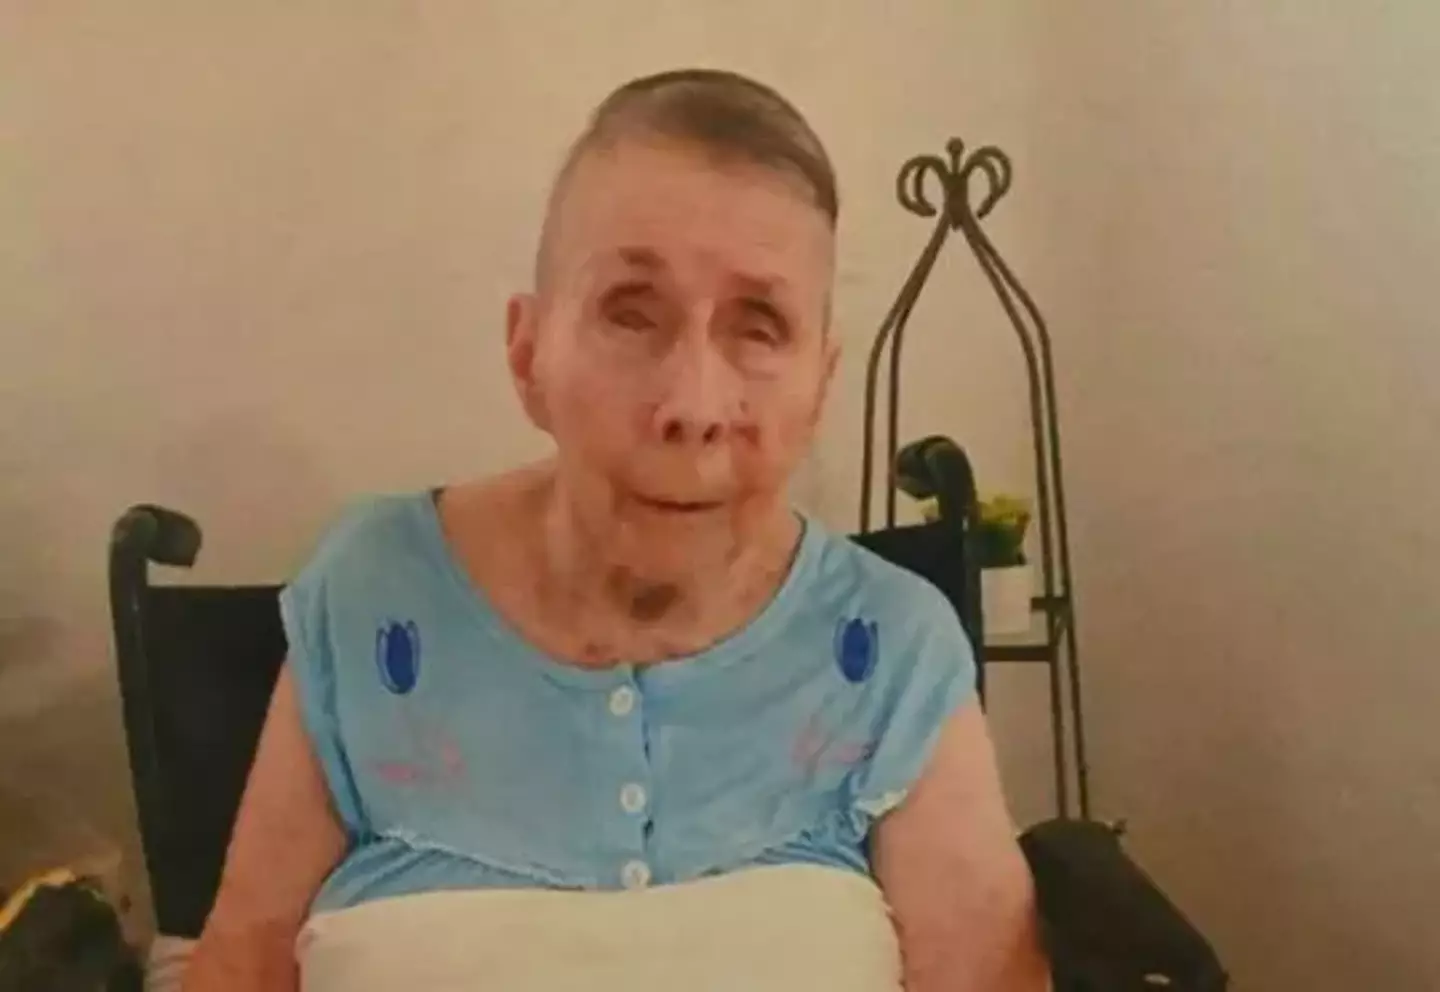 The 83-year-old was found in Puerto Rico. (WPXI)